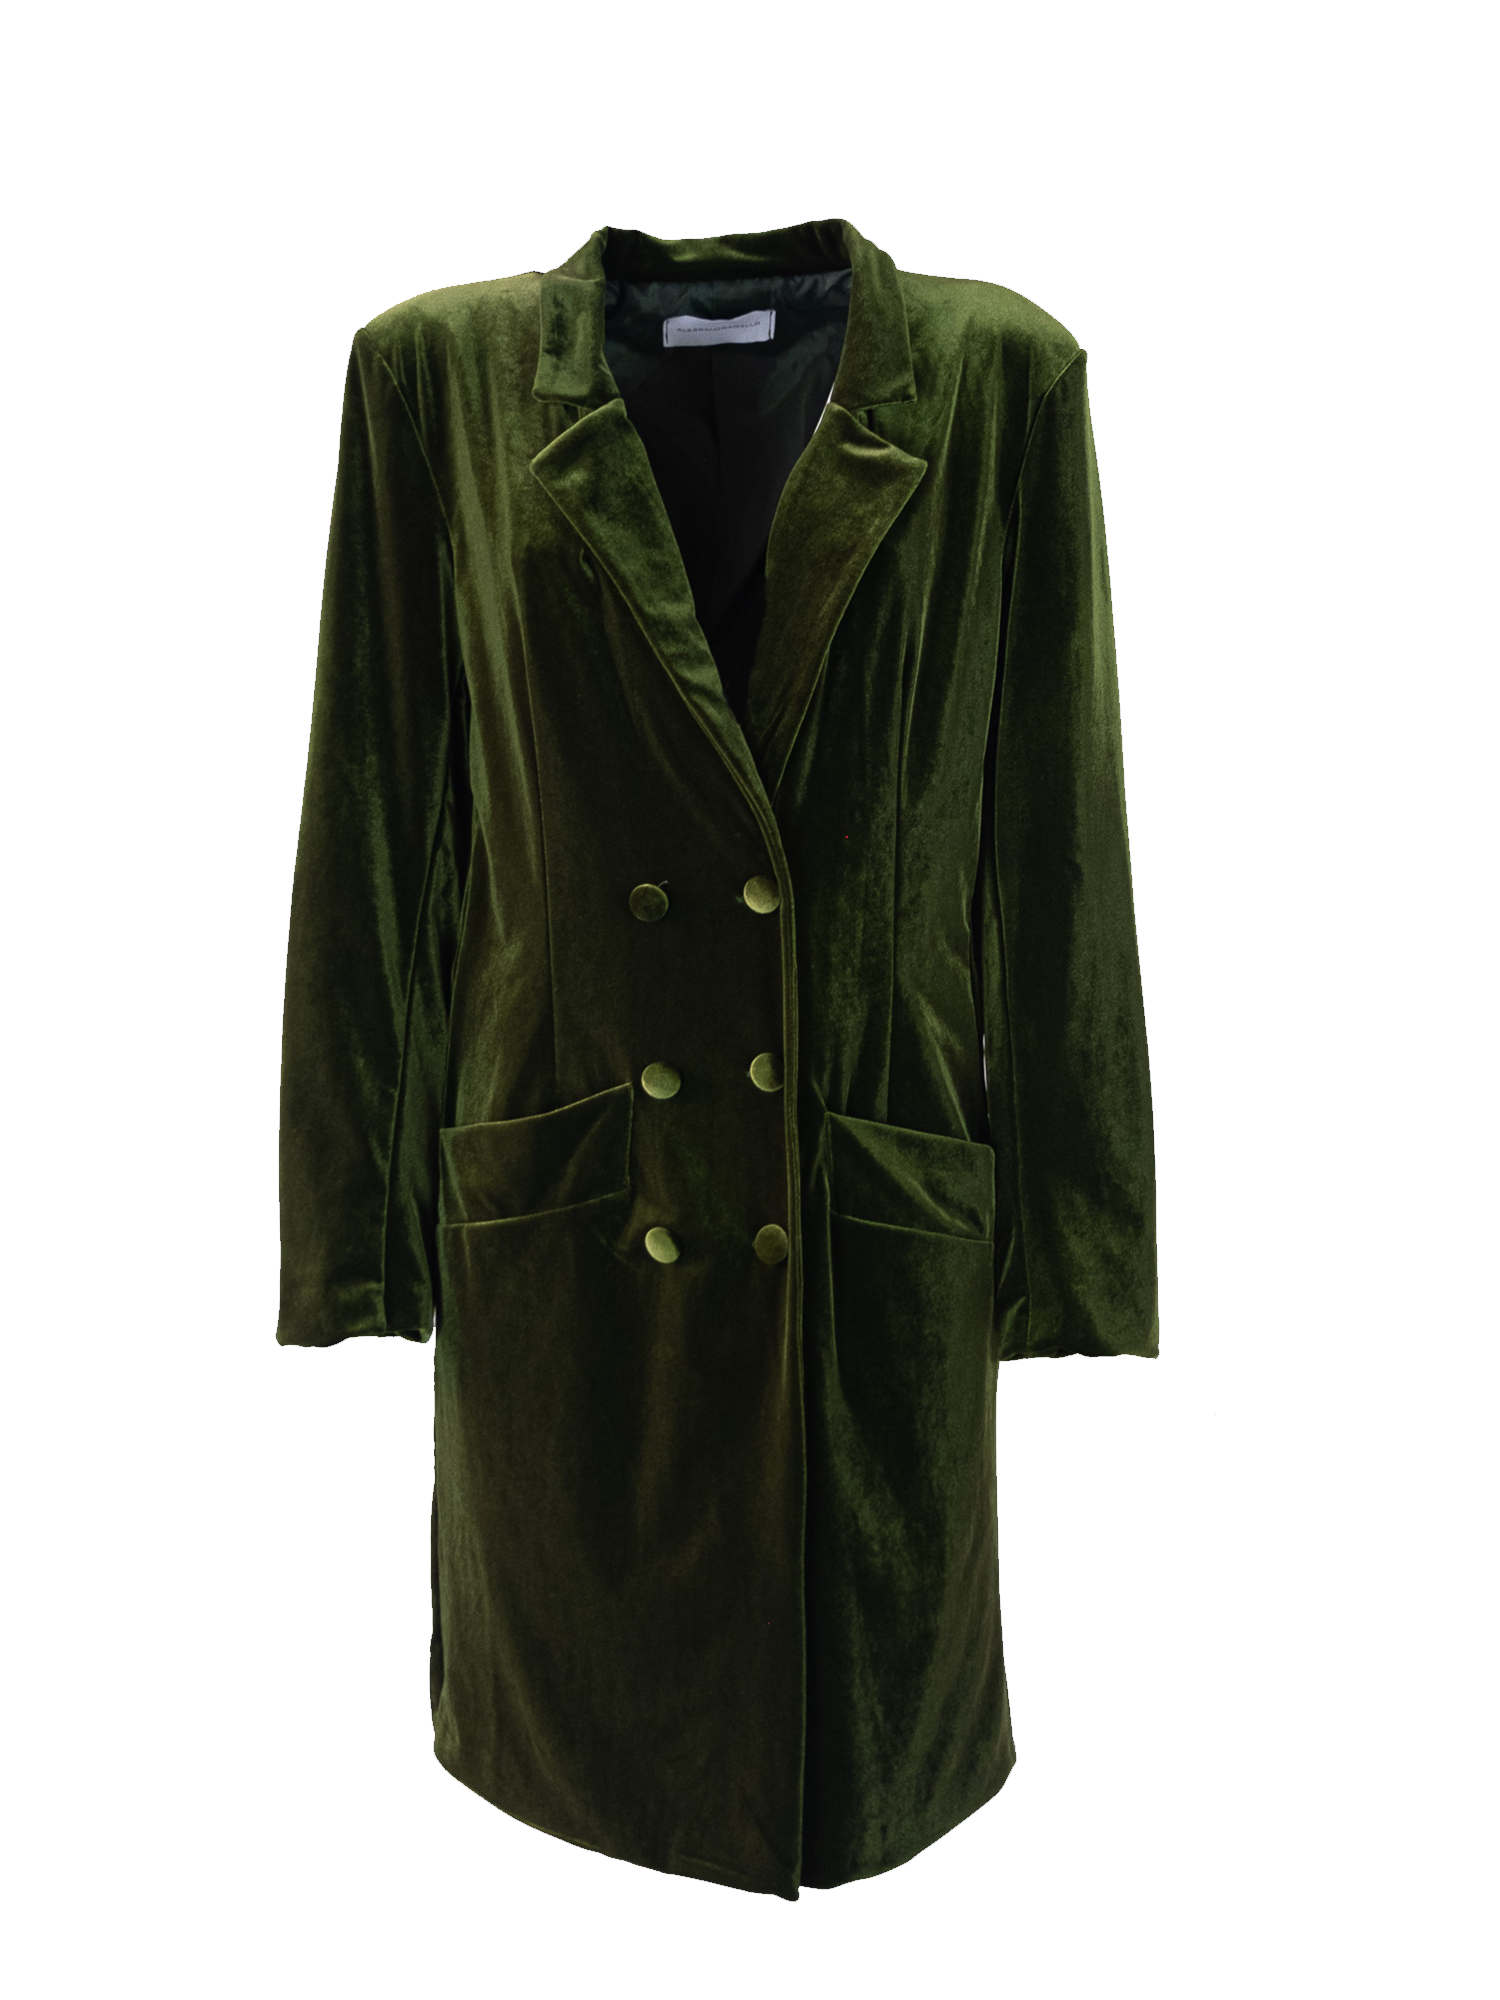 NORA - robe manteau dress in green chenille